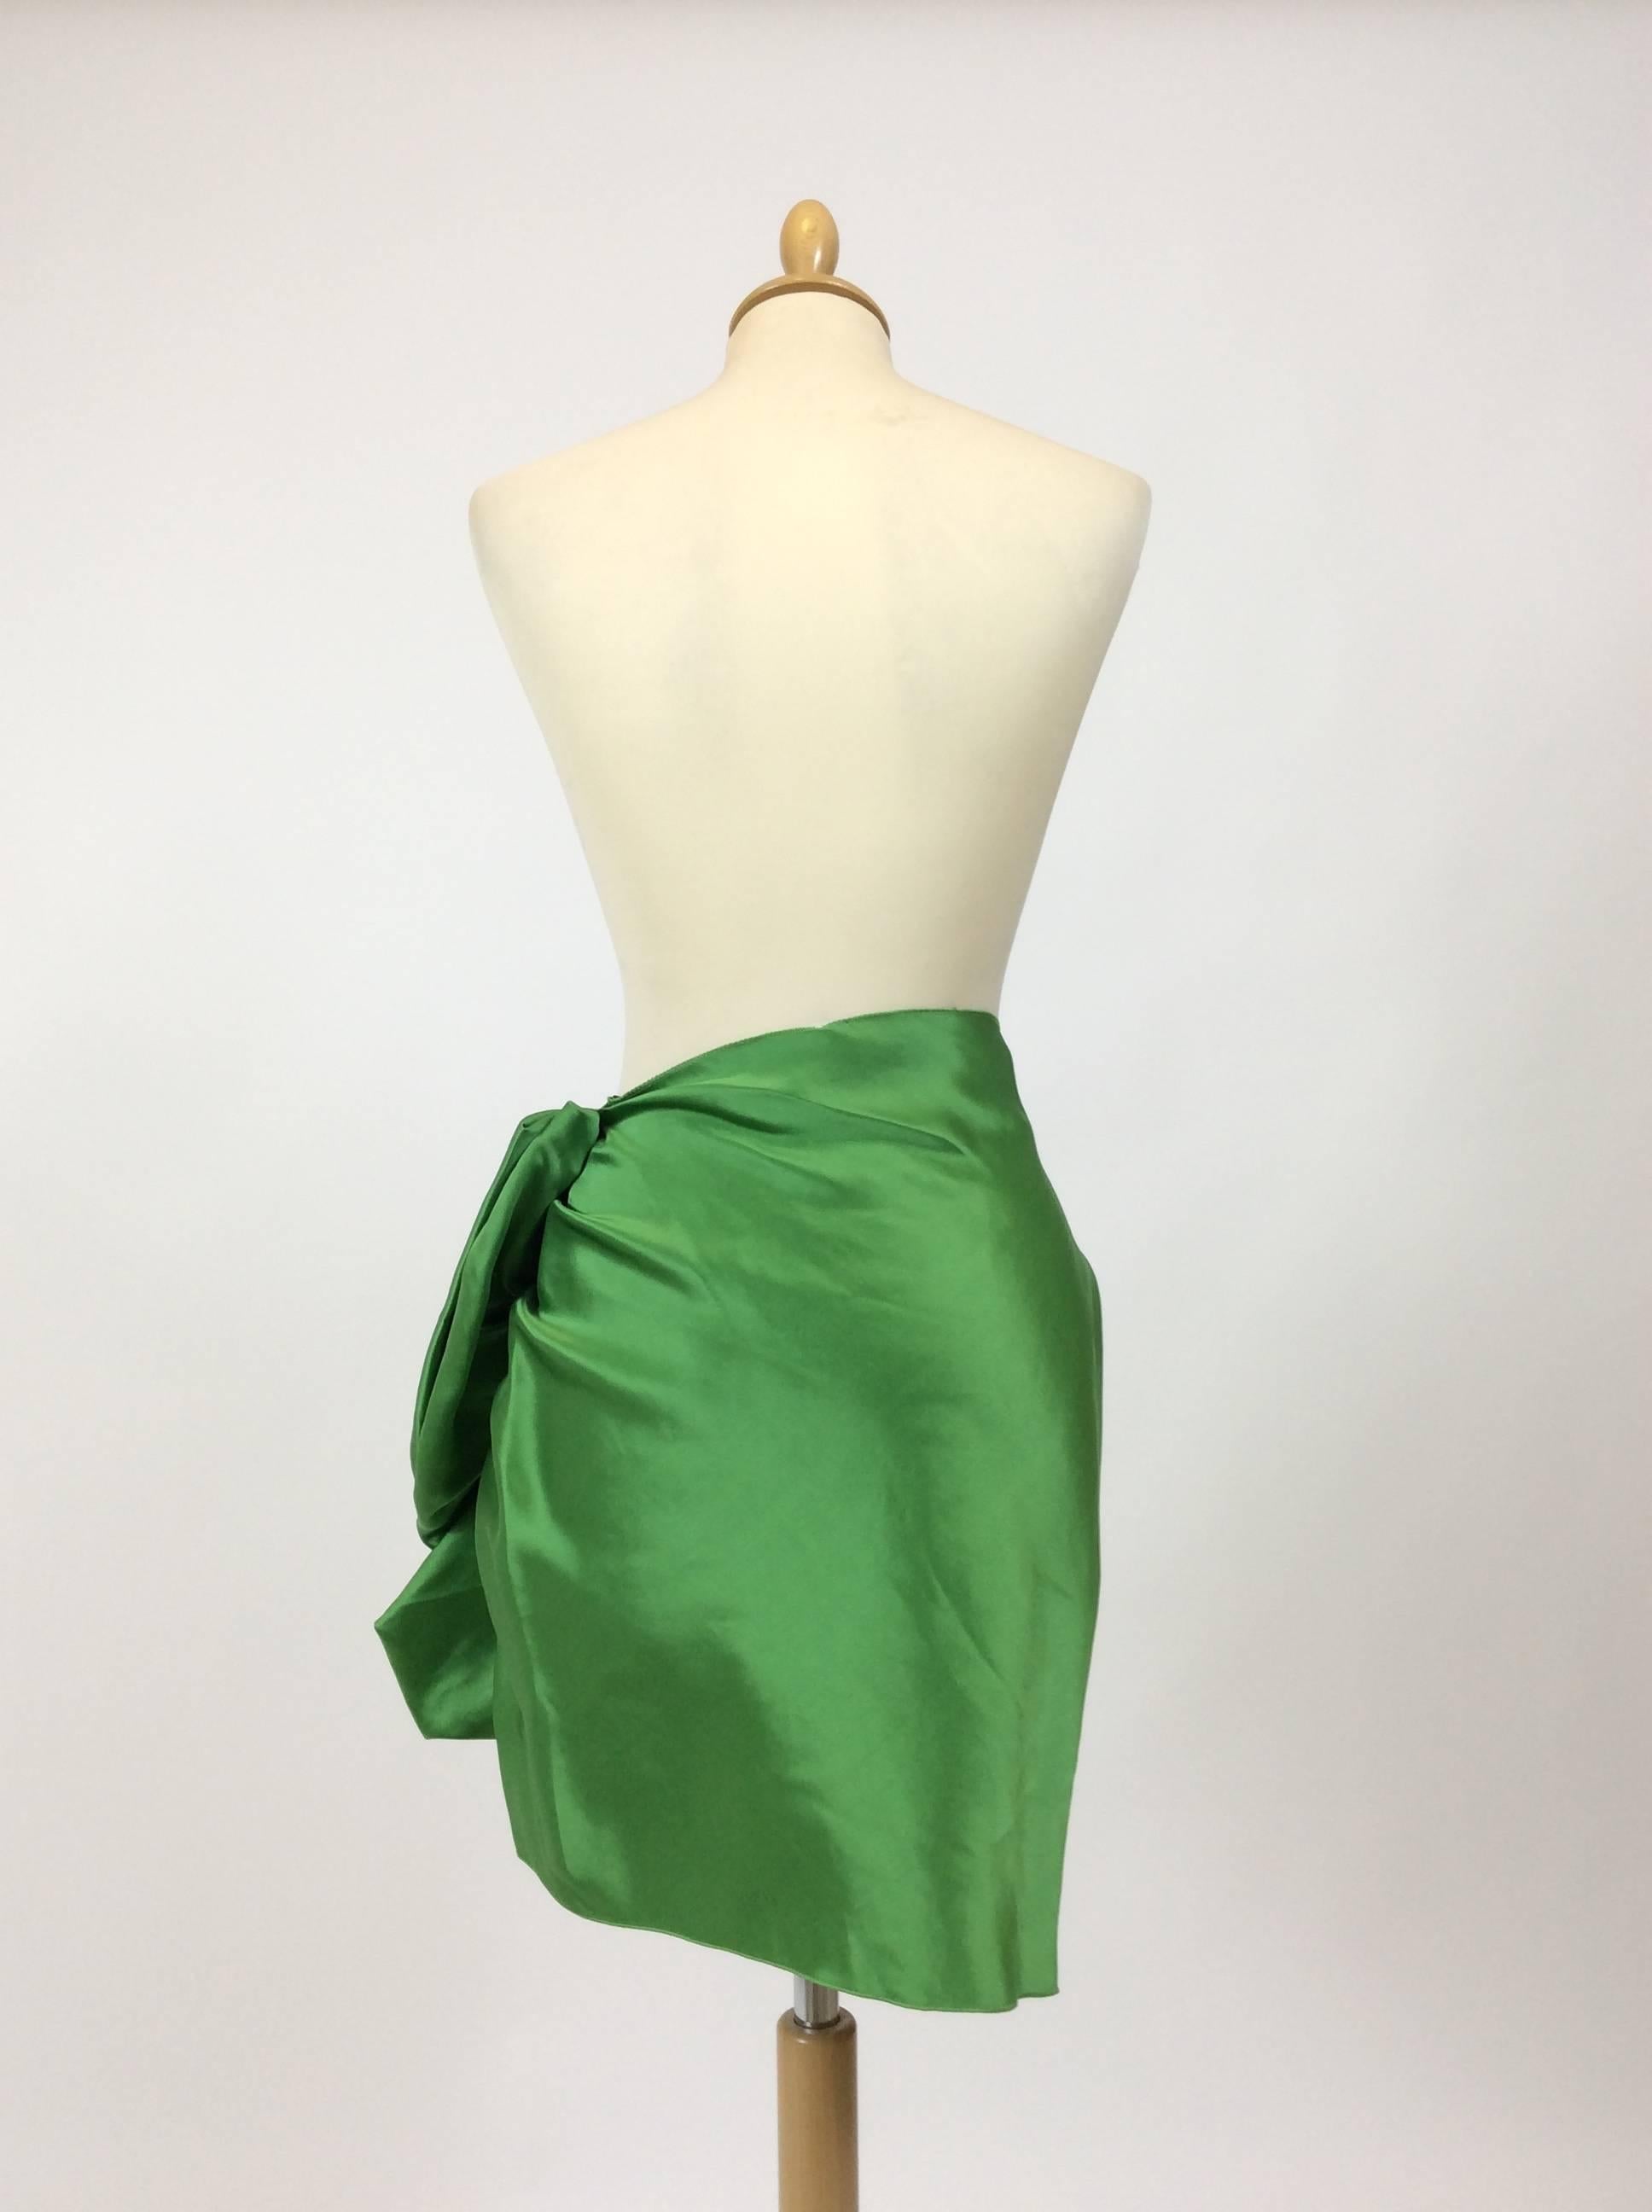 Lanvin Silk Satin Flounce Skirt In Excellent Condition For Sale In Milan, Italy